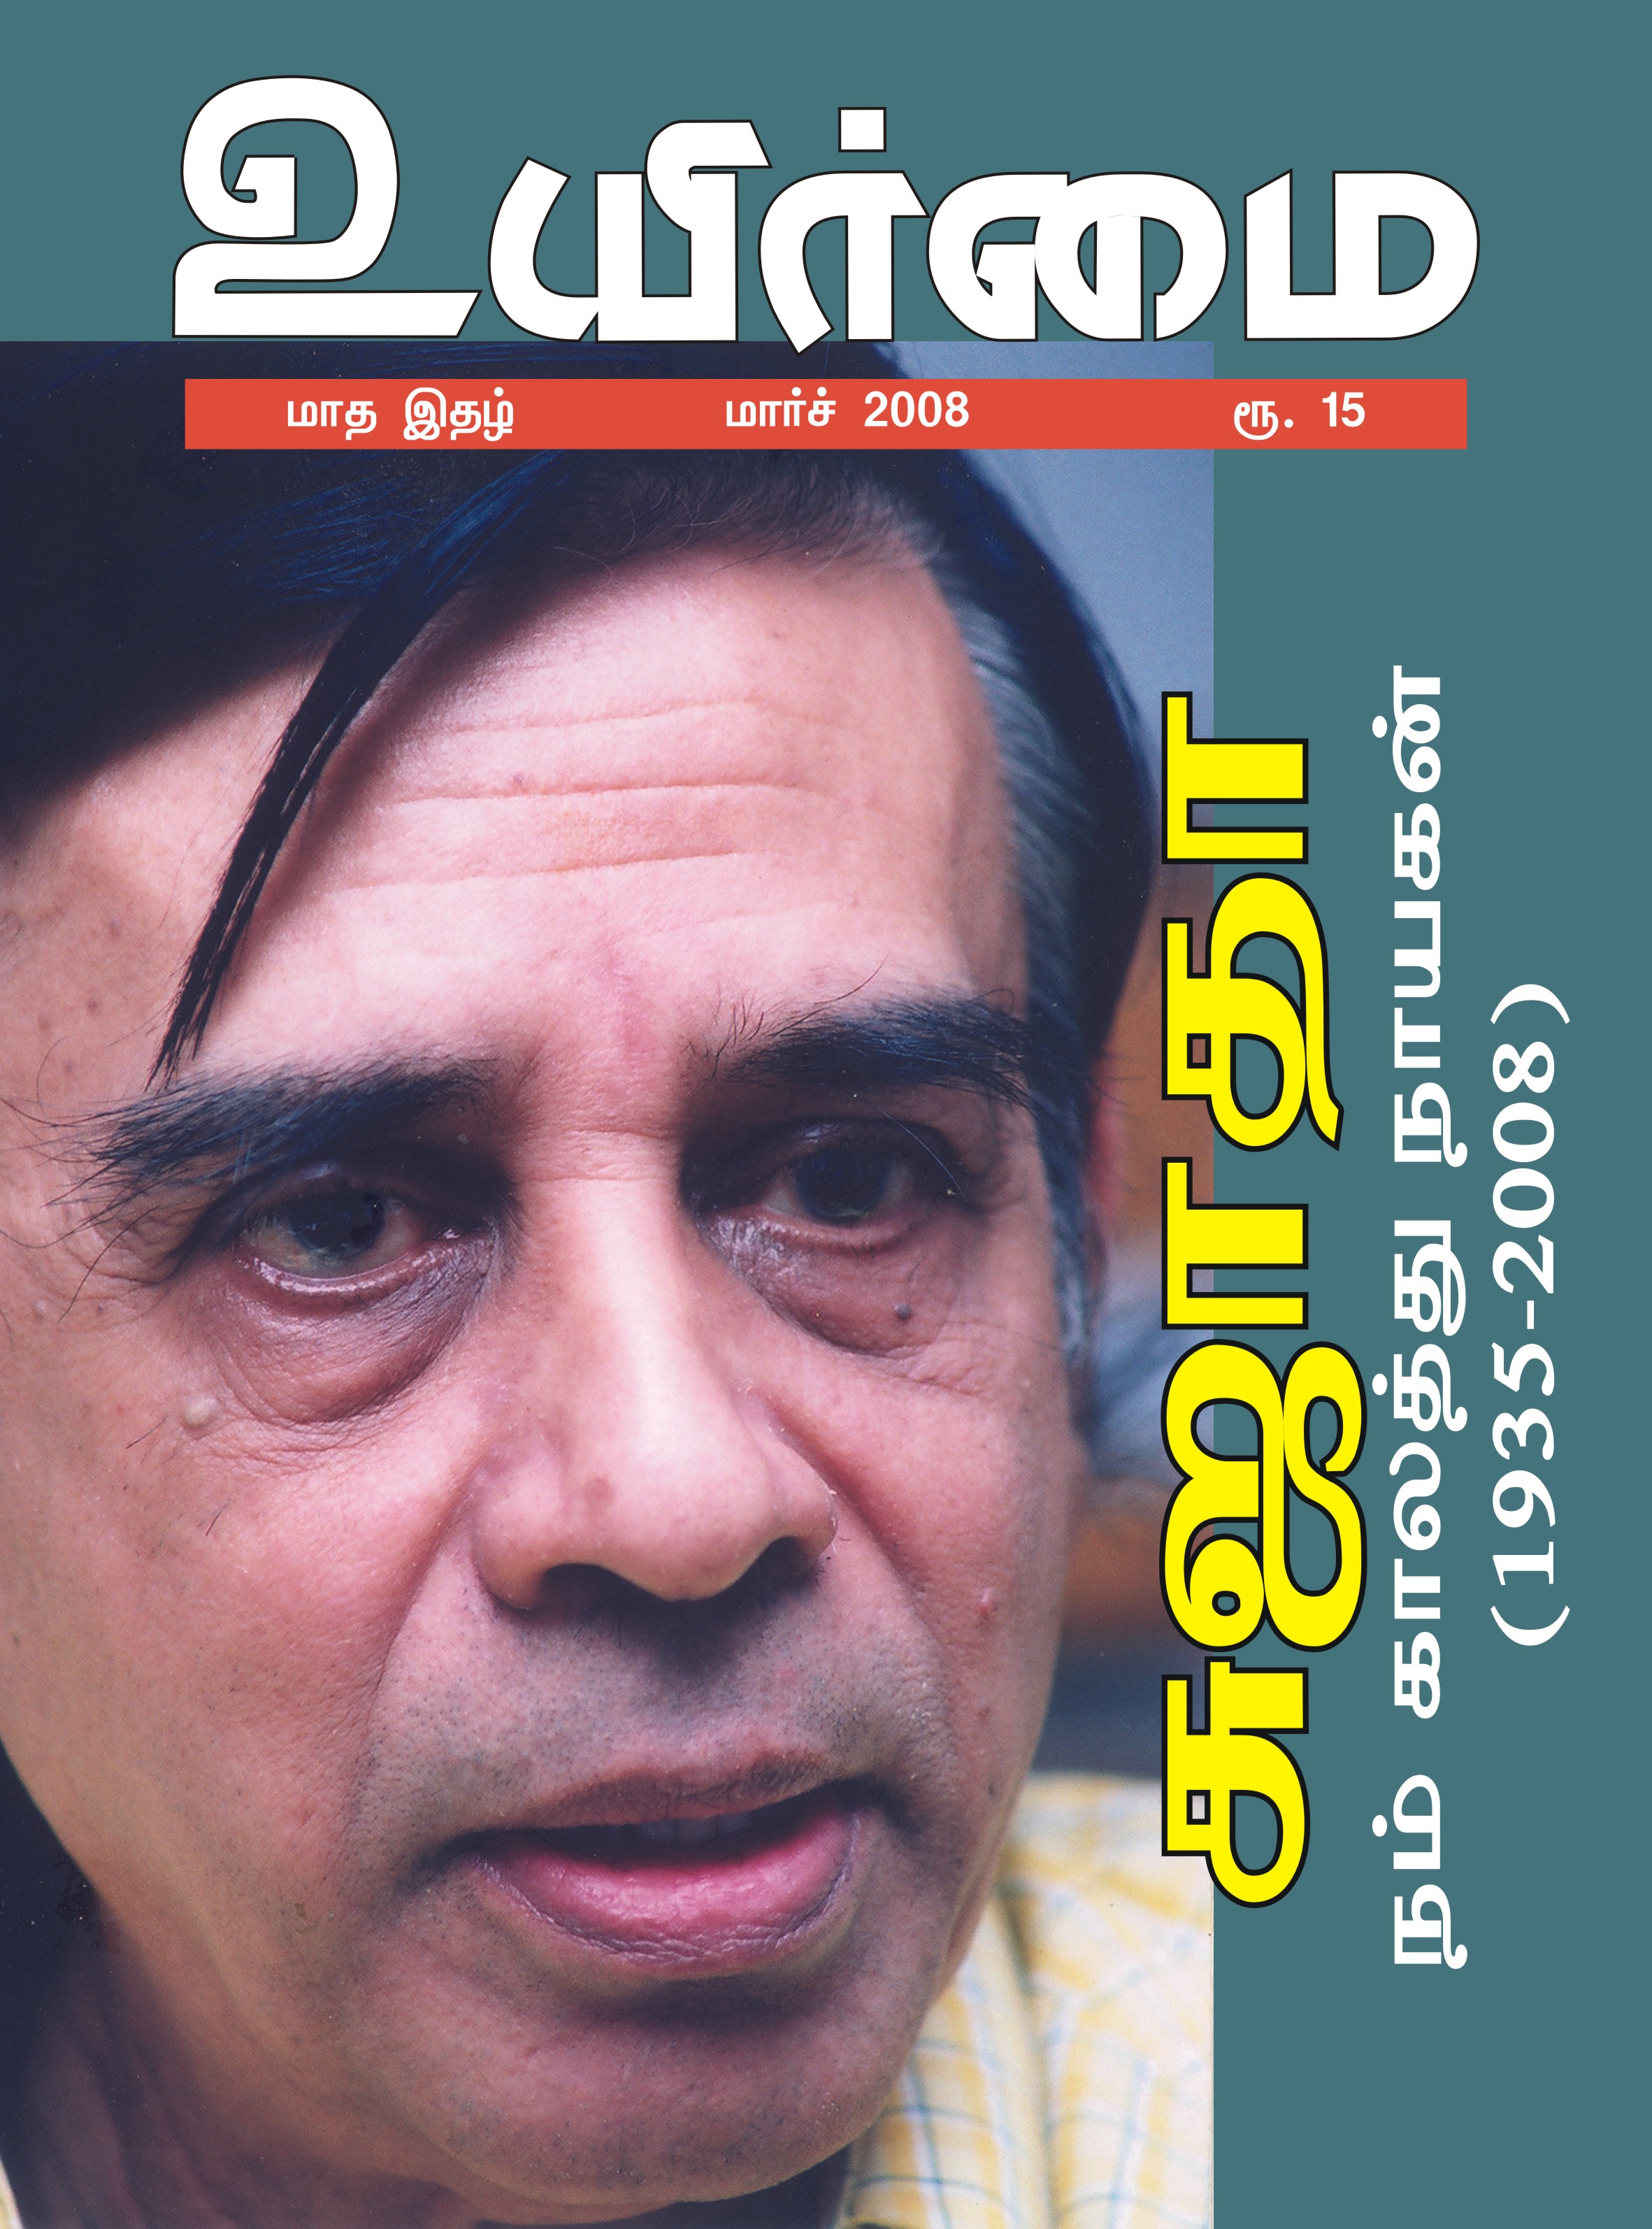 http://10hot.files.wordpress.com/2009/07/sujatha-8-writers-authors-magz-issues-uyirmmai-march-2008-front-cover.jpg